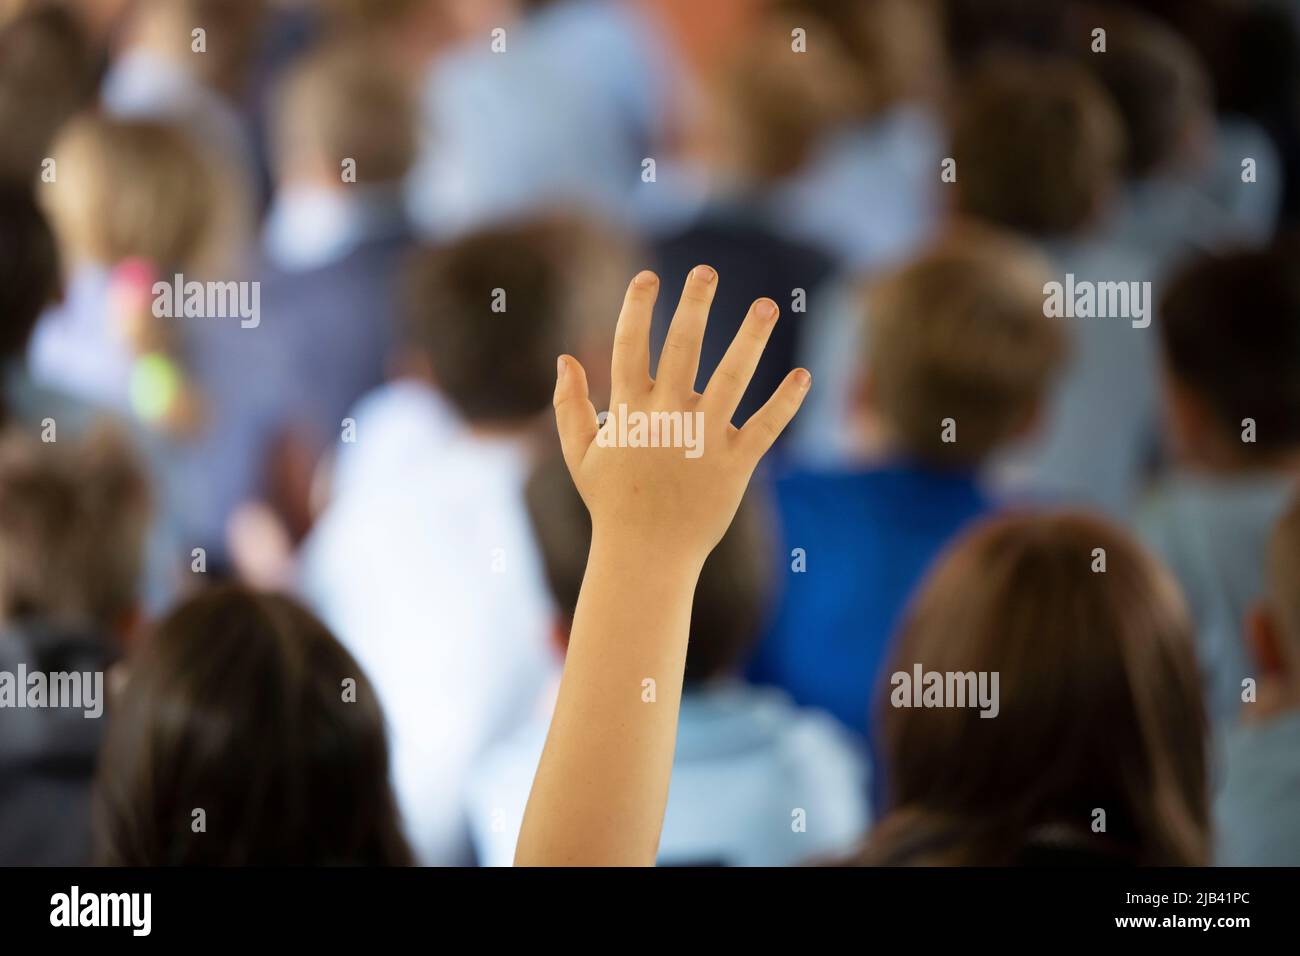 A child raises their hand in the air during a lesson in a school classroom. Stock Photo